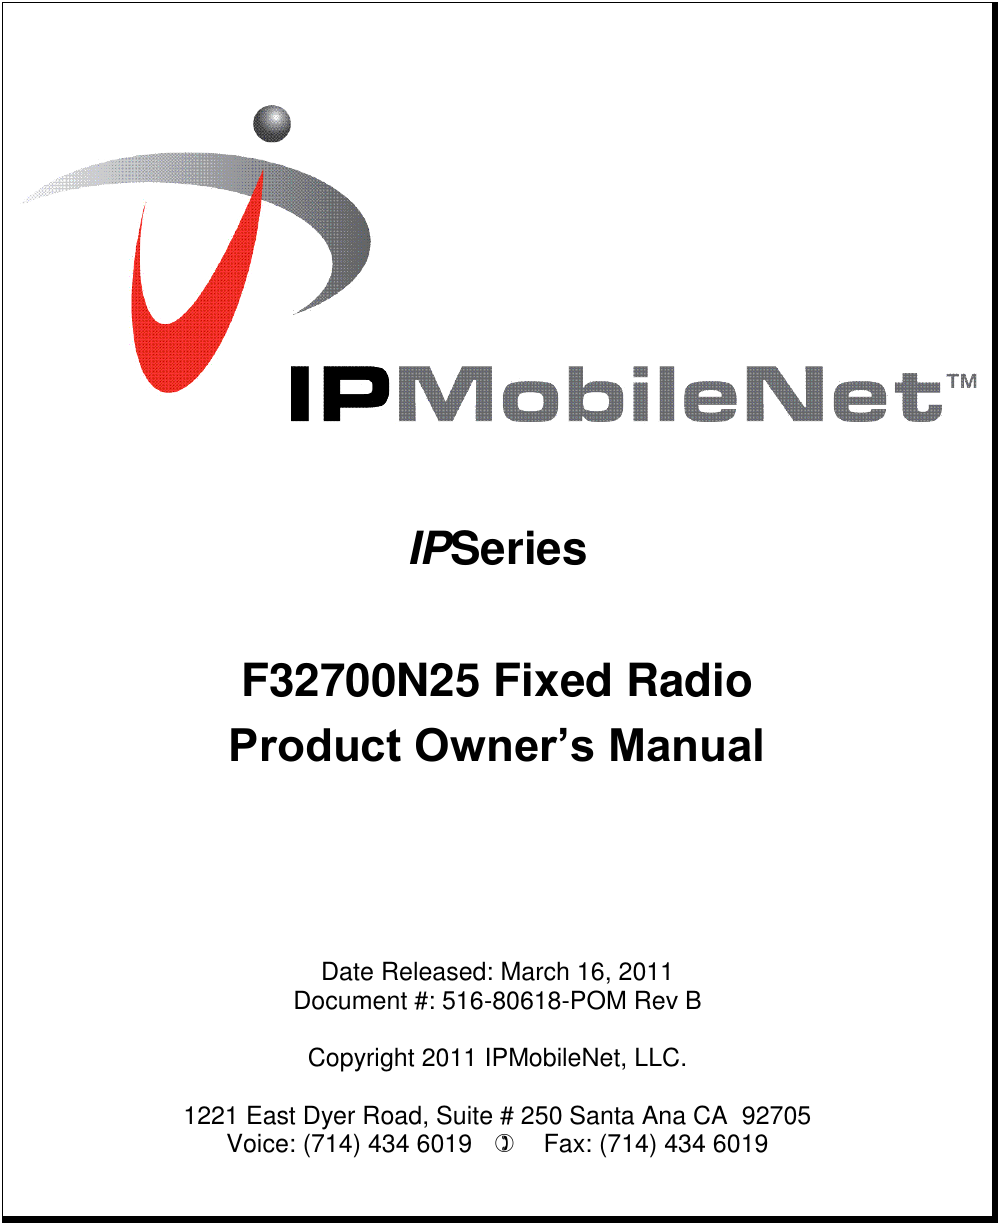          IPSeries  F32700N25 Fixed Radio Product Owner‟s Manual       Date Released: March 16, 2011 Document #: 516-80618-POM Rev B  Copyright 2011 IPMobileNet, LLC.  1221 East Dyer Road, Suite # 250 Santa Ana CA  92705 Voice: (714) 434 6019       Fax: (714) 434 6019      